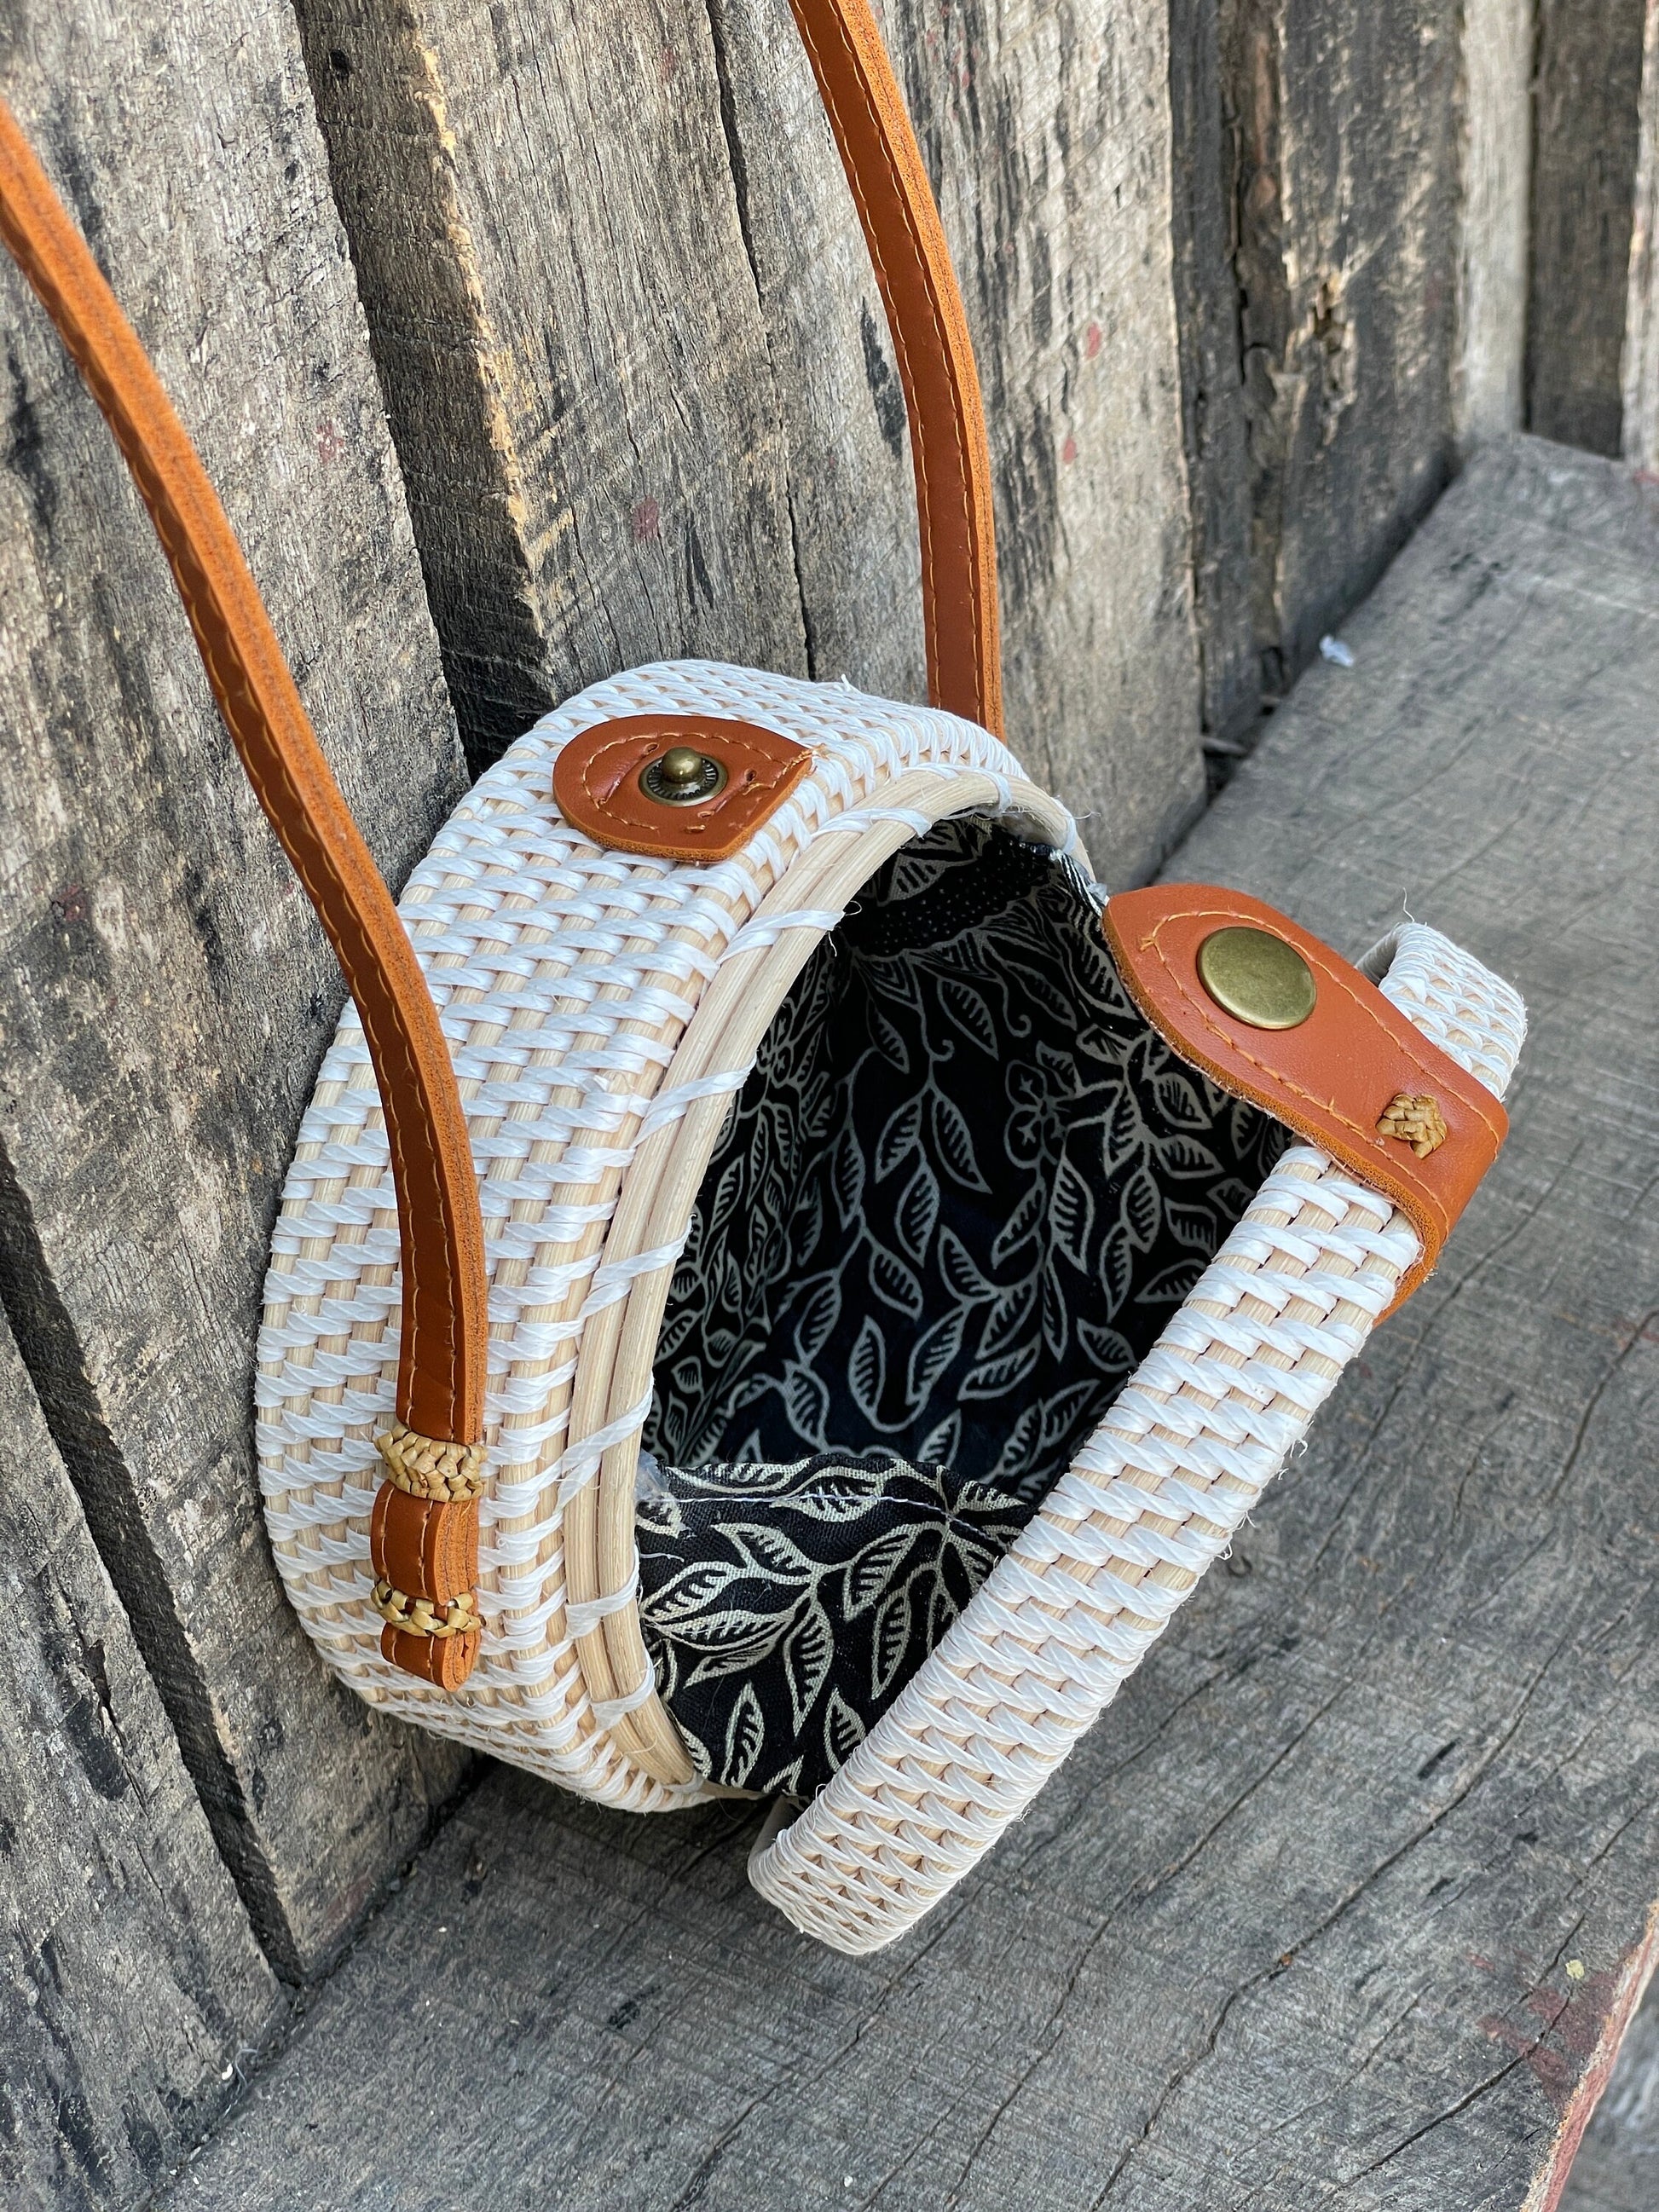 Classic Round White Rattan Bag, Bali Bags, Handwoven Crossbody Purse, Braided Straw Bag, Bali Sling Bags Rattan Bags Gift for her